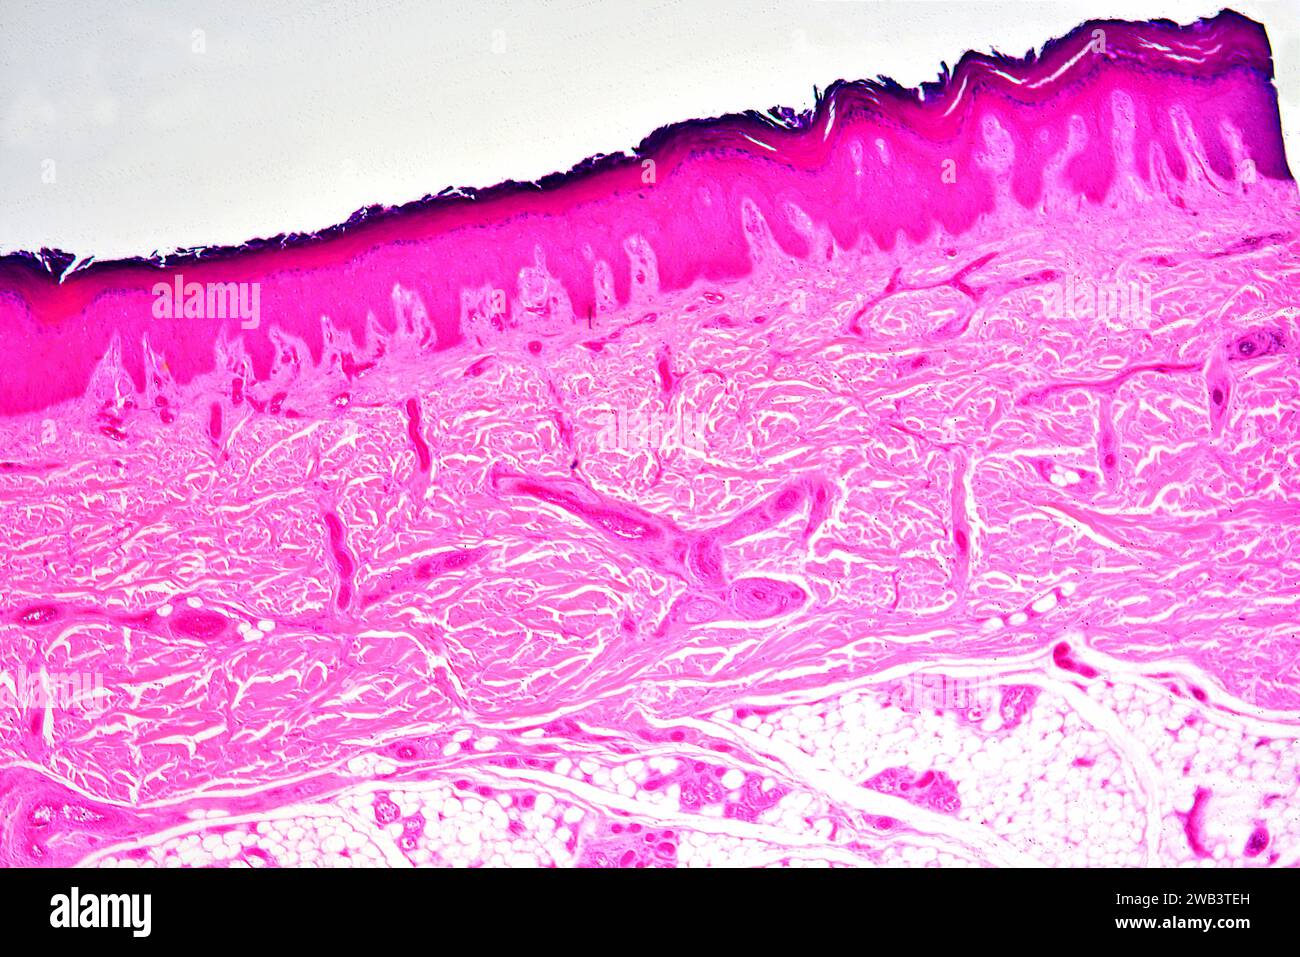 Stratified squamous epithelium from human hand skin showing keratinized epidermis and dermis with connective tissues. X25 at 10 cm wide. Stock Photo